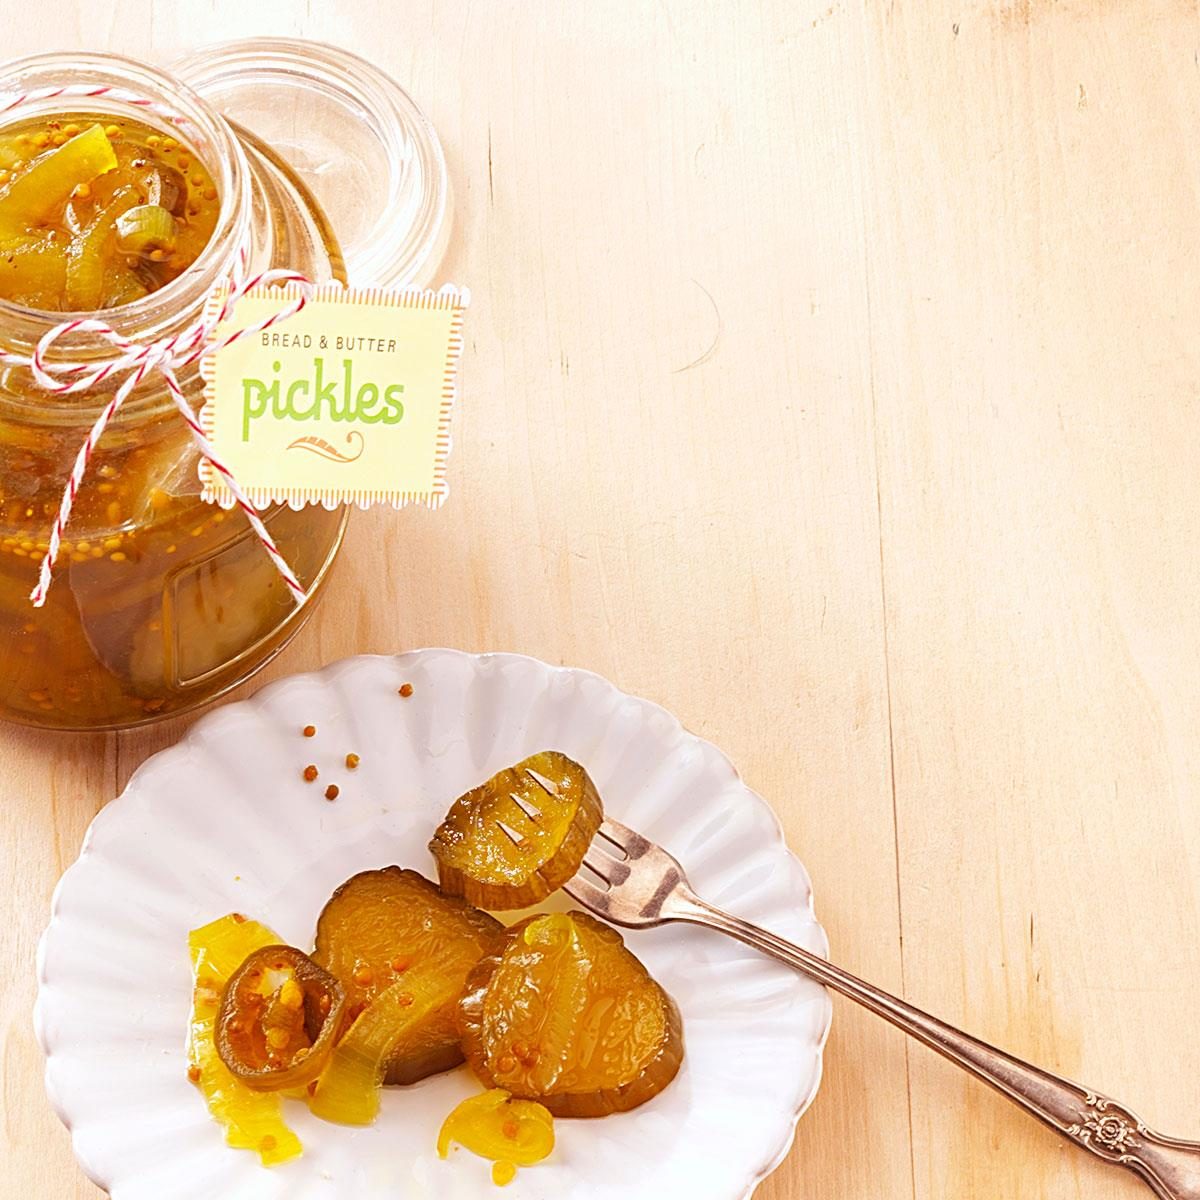 Jalapeno Bread & Butter Pickles